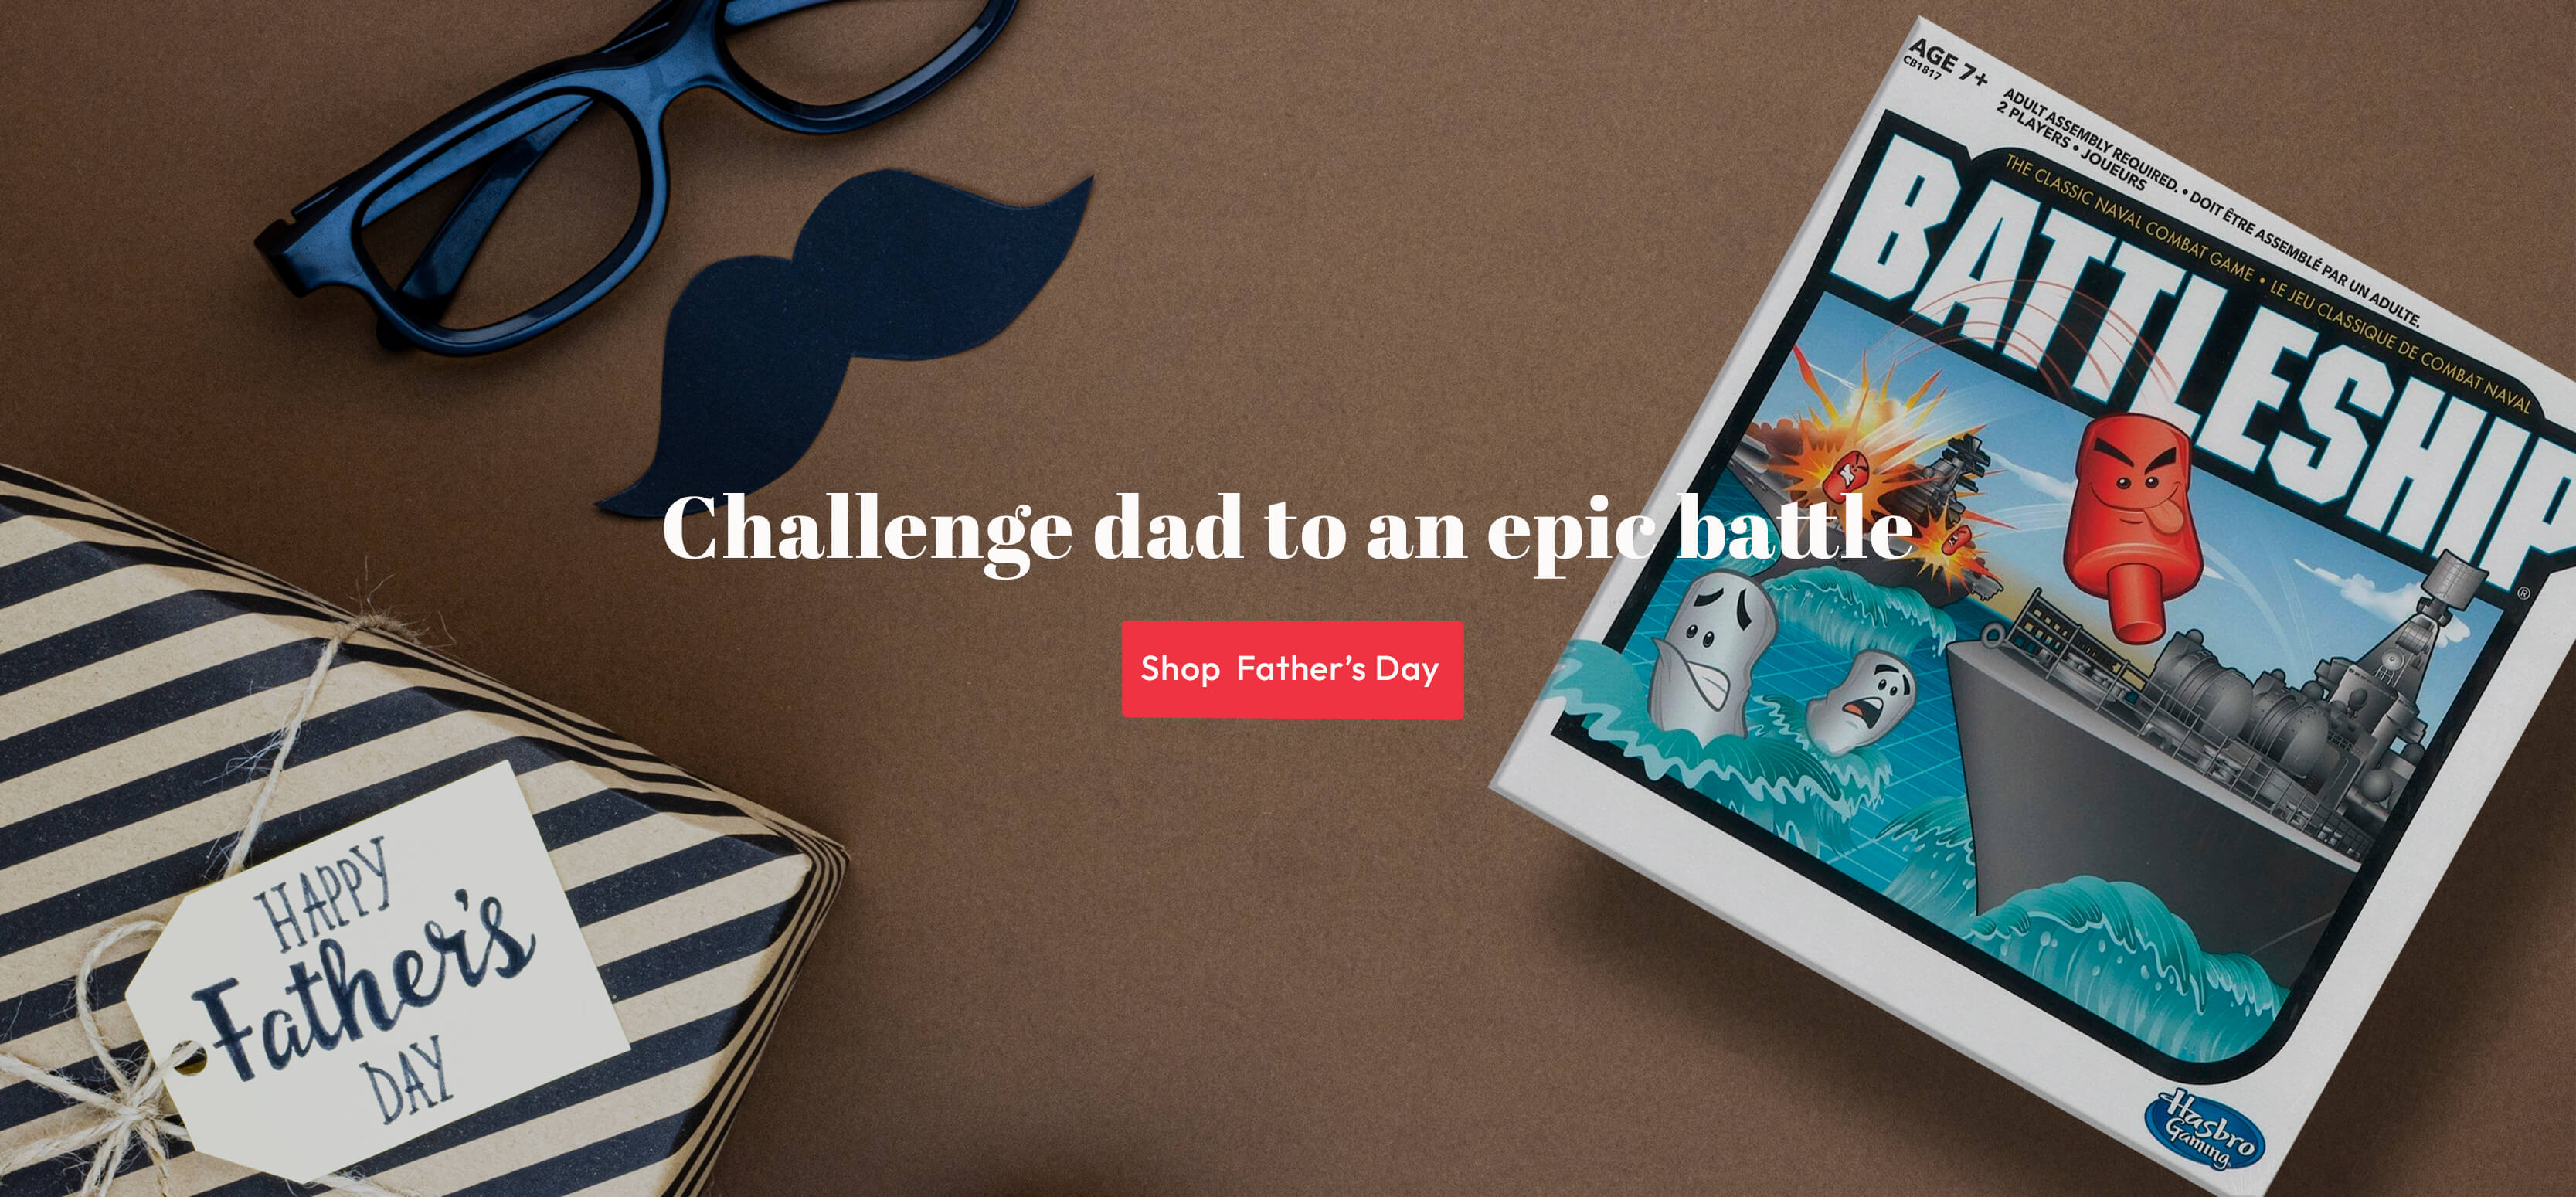 Epic battles to challenge dad's everywhere. Who will come out on top?